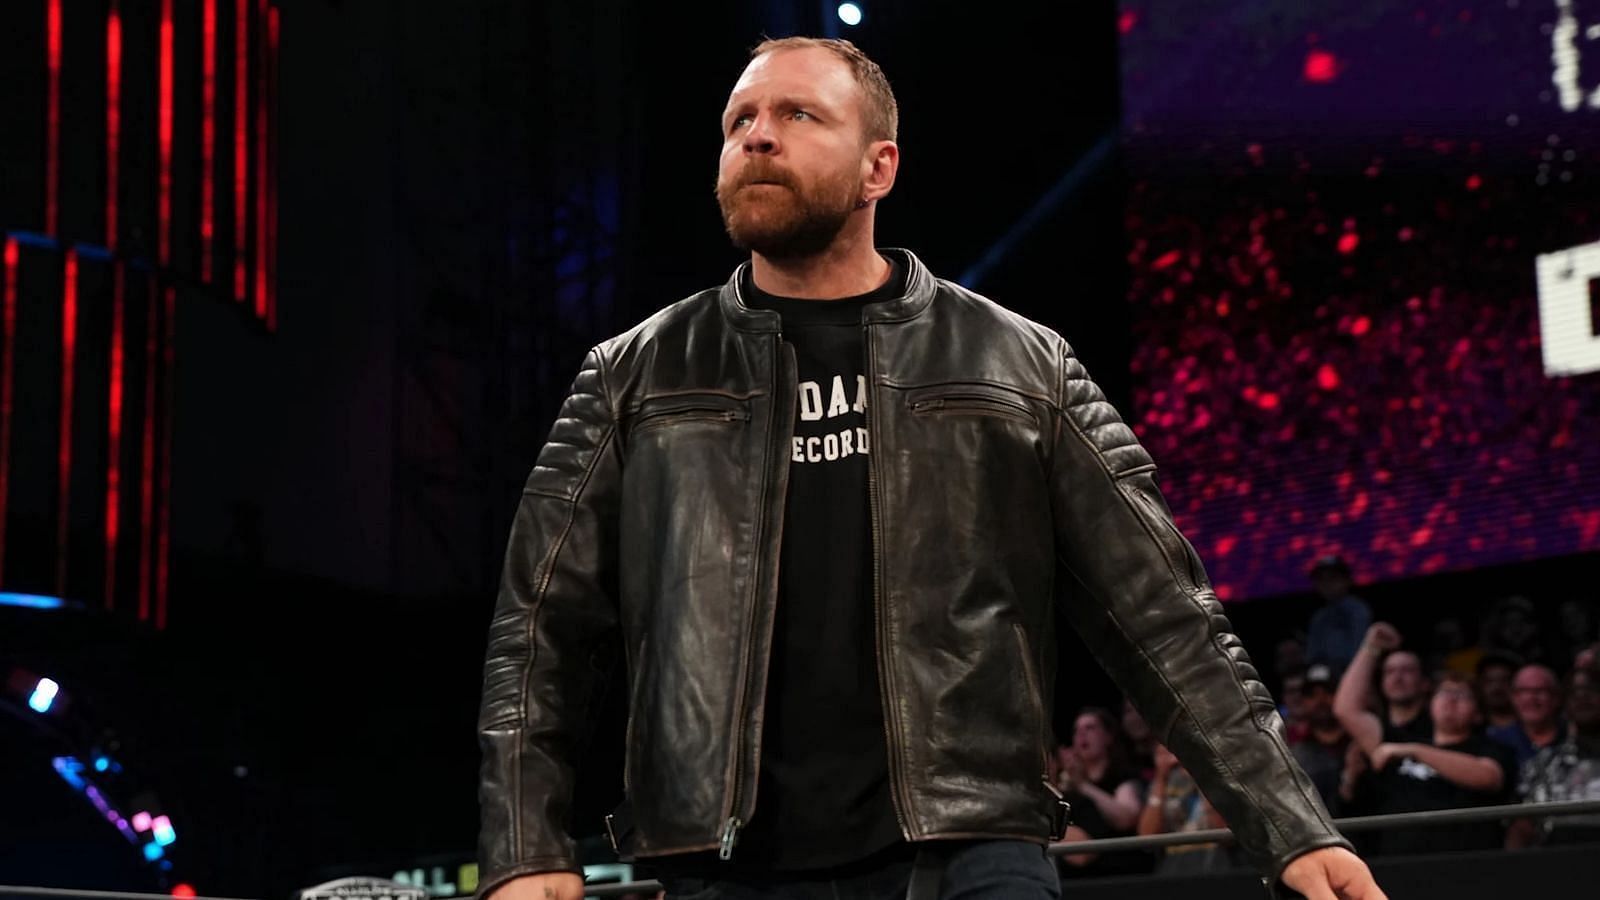 Jon Moxley is part of the Blackpool Combat Club in AEW